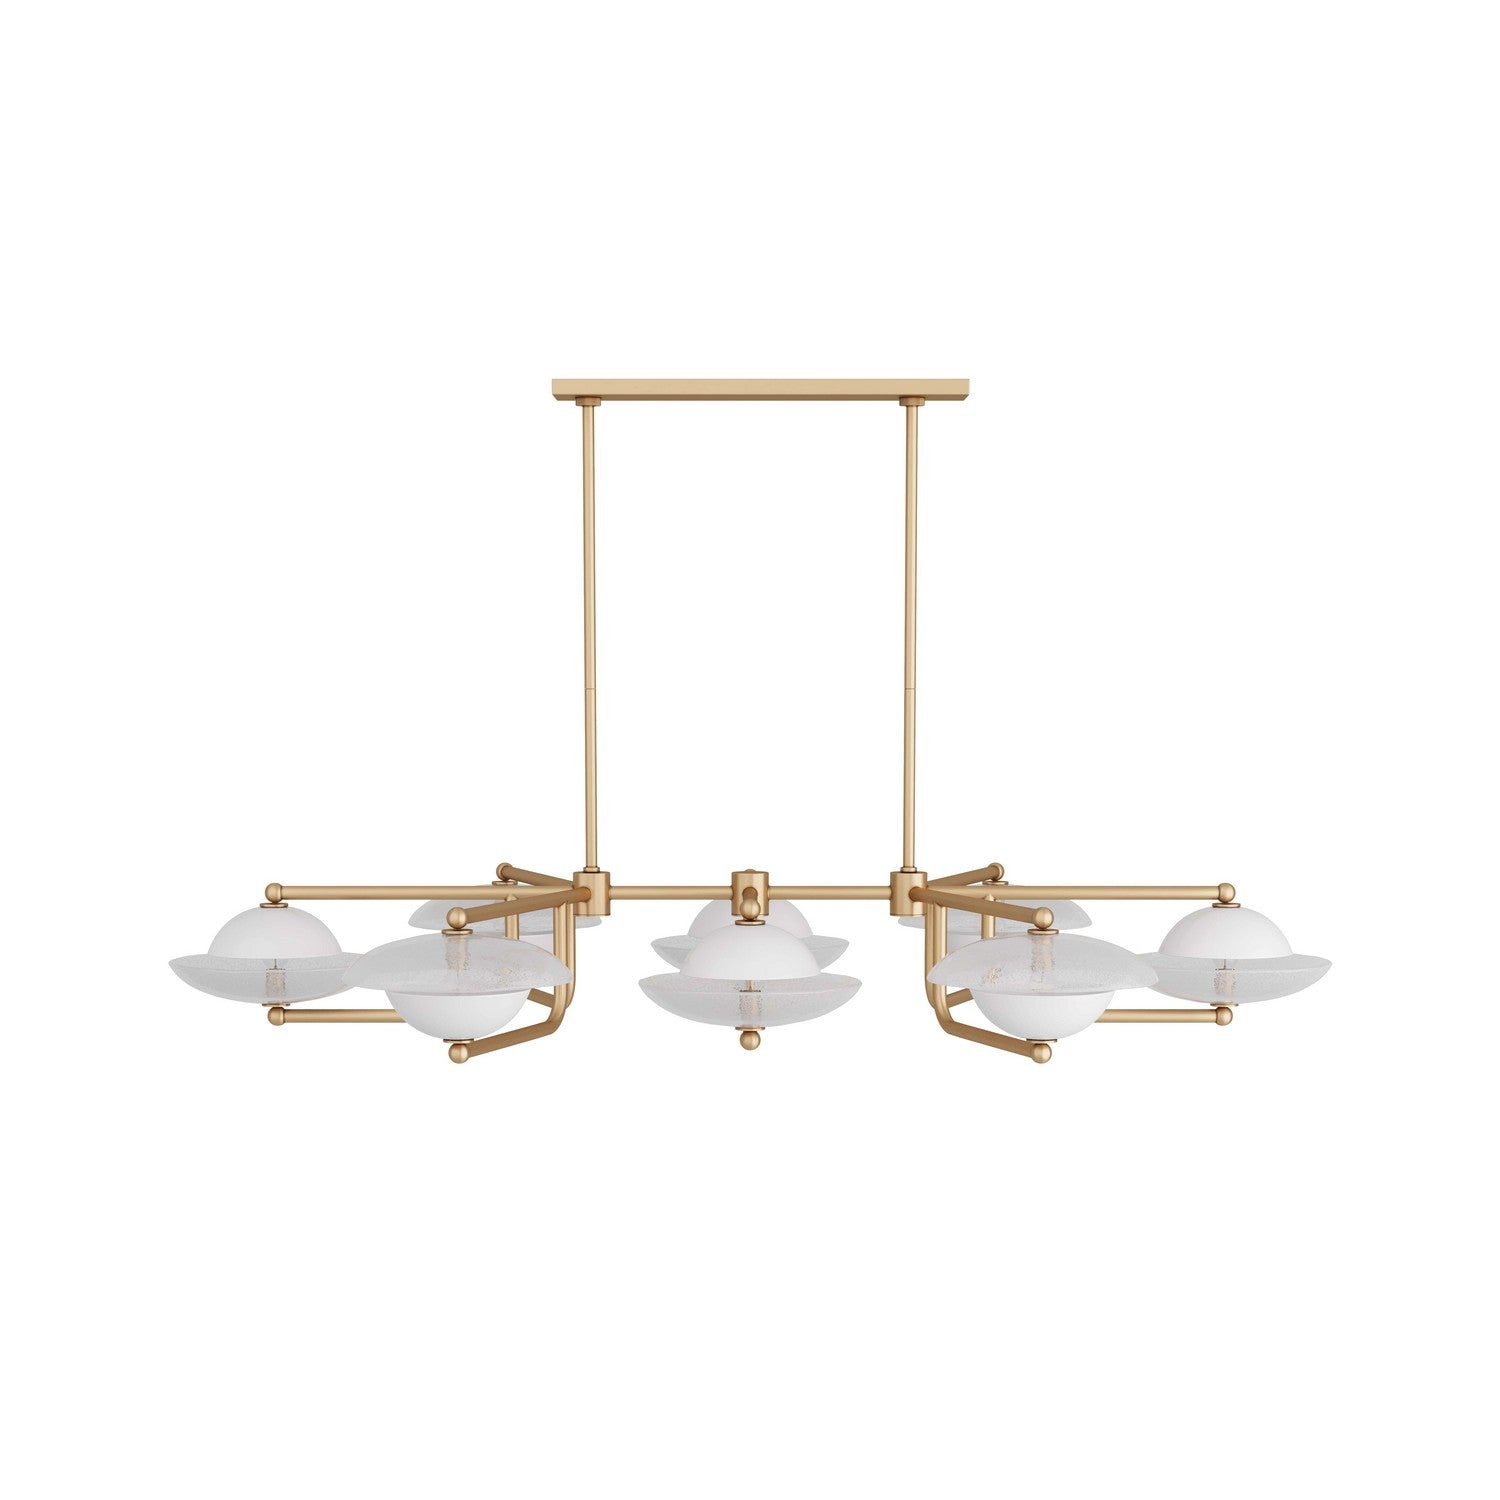 Eight Light Chandelier from the Towne collection in Clear Seedy finish